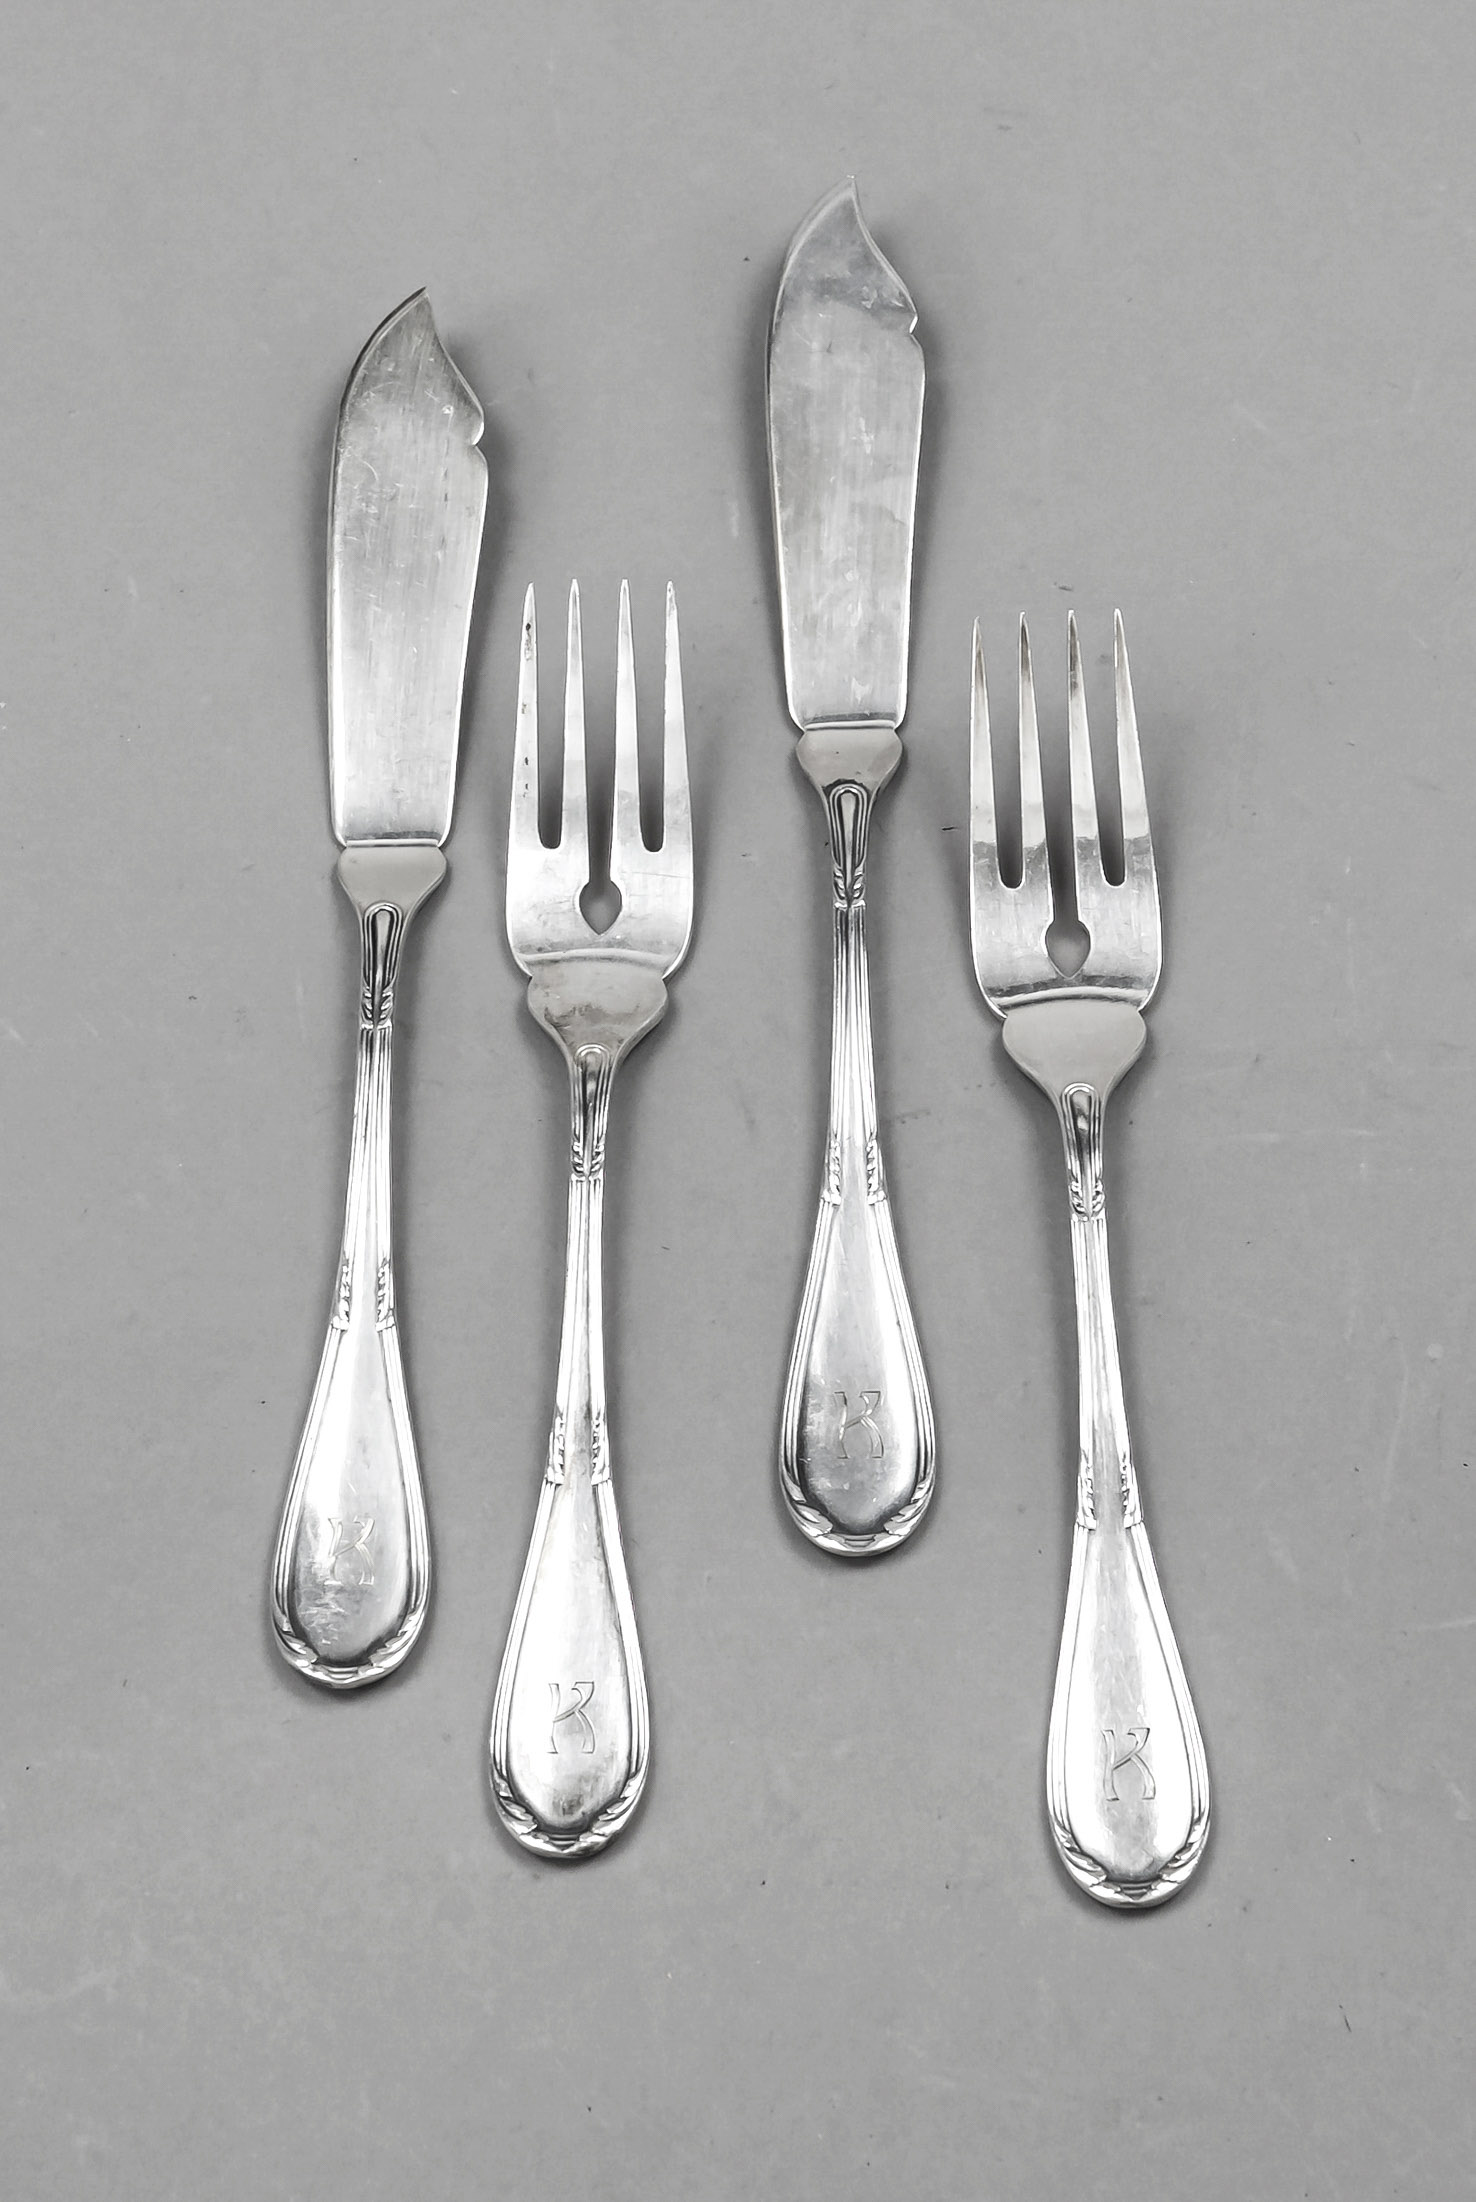 Fish cutlery for six persons, German, 20th century, maker's mark M. H. Wilkens & Söhne, Bremen-